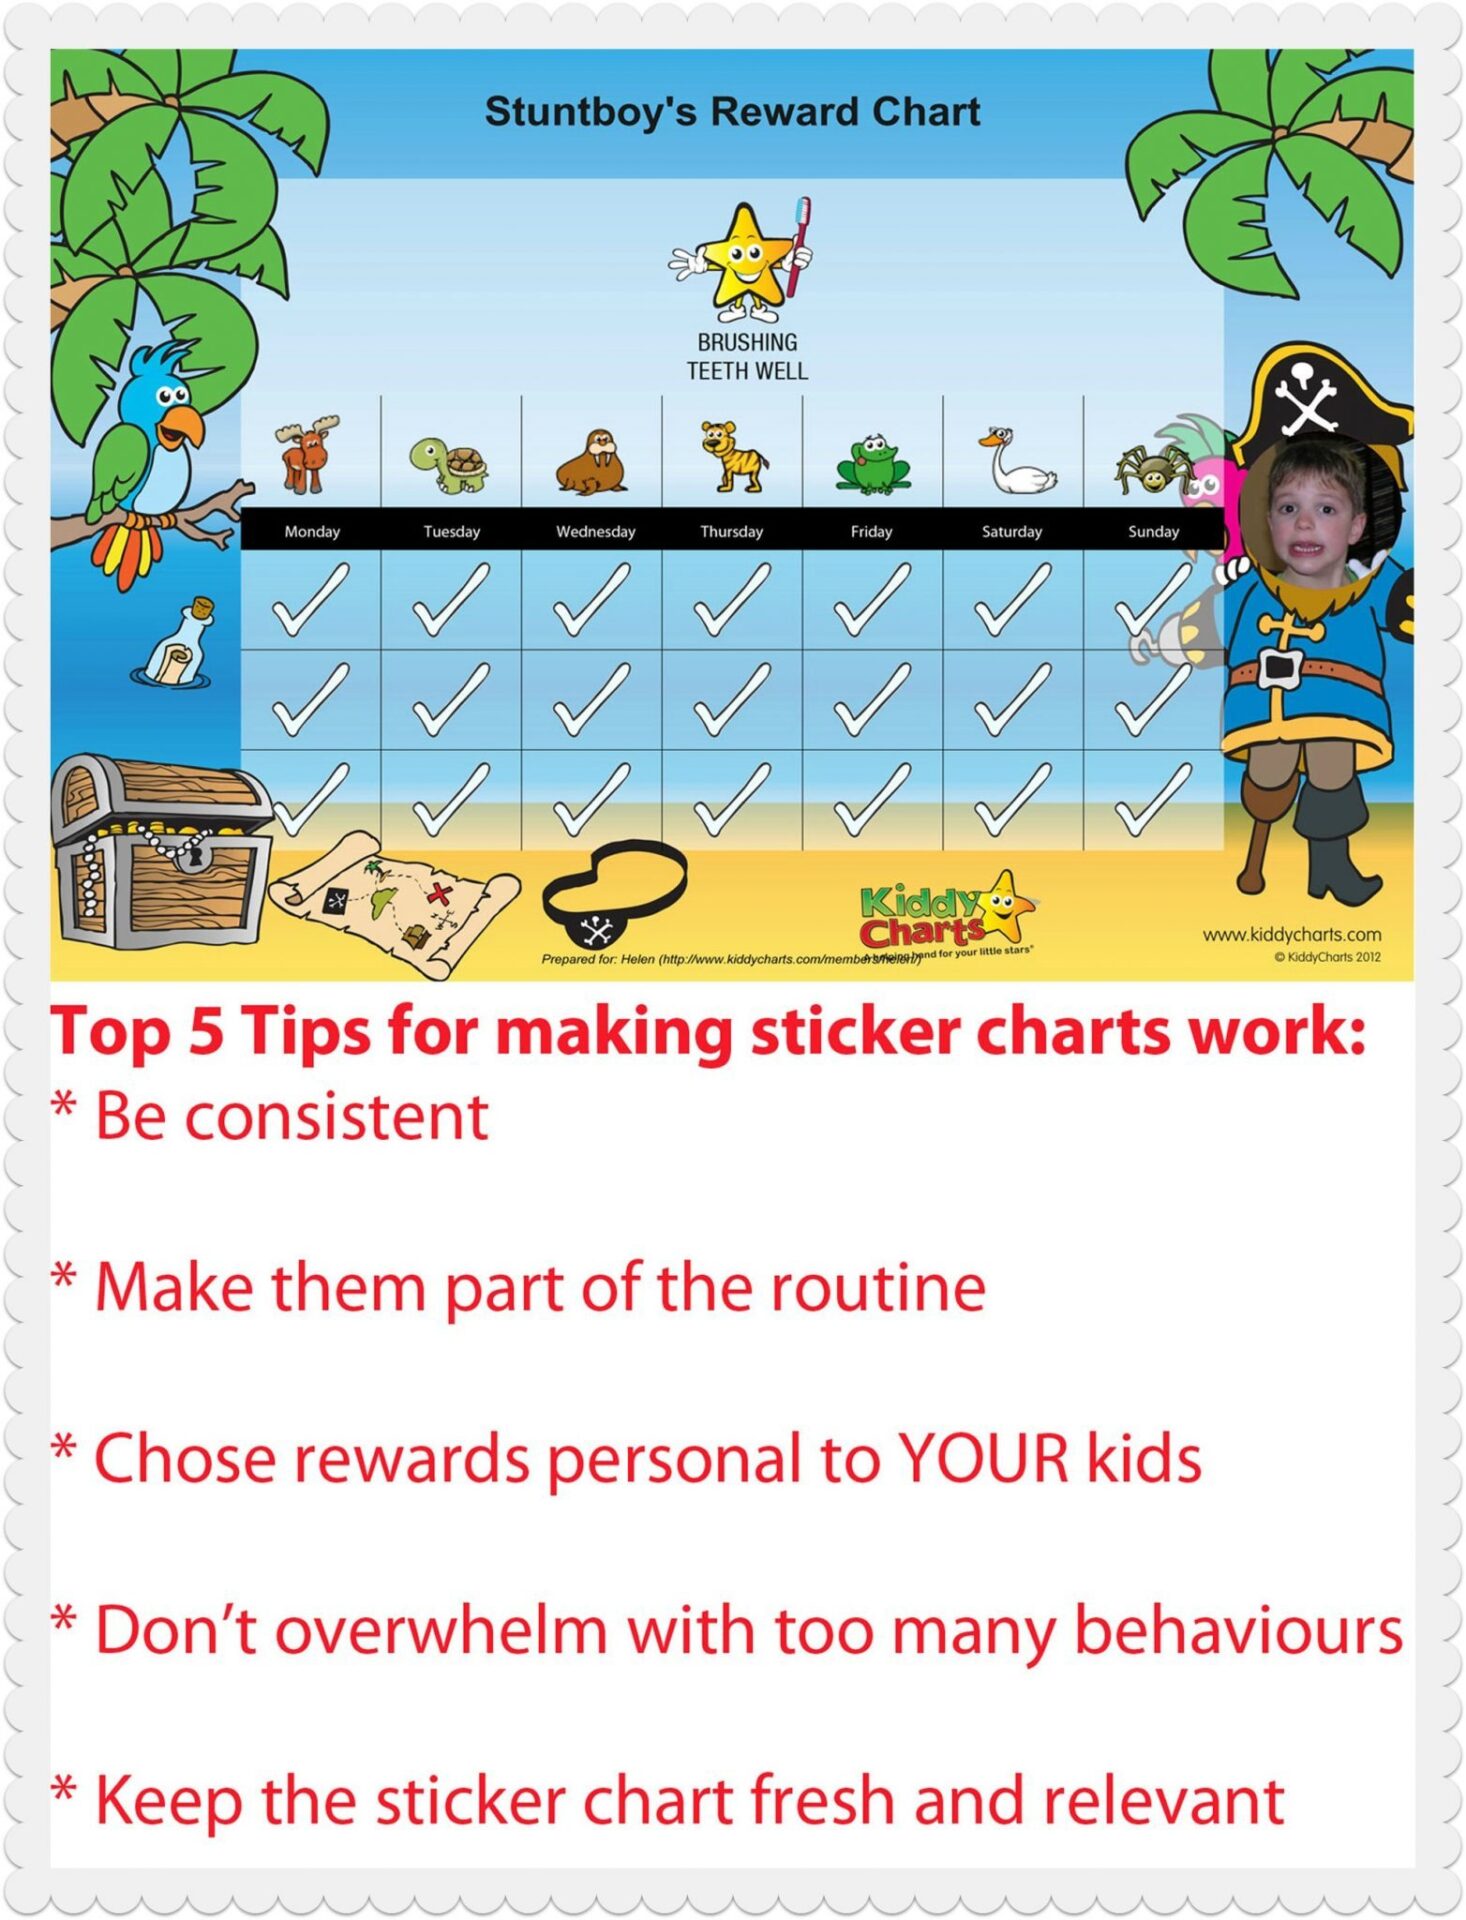 Top five tips for making sticker charts work